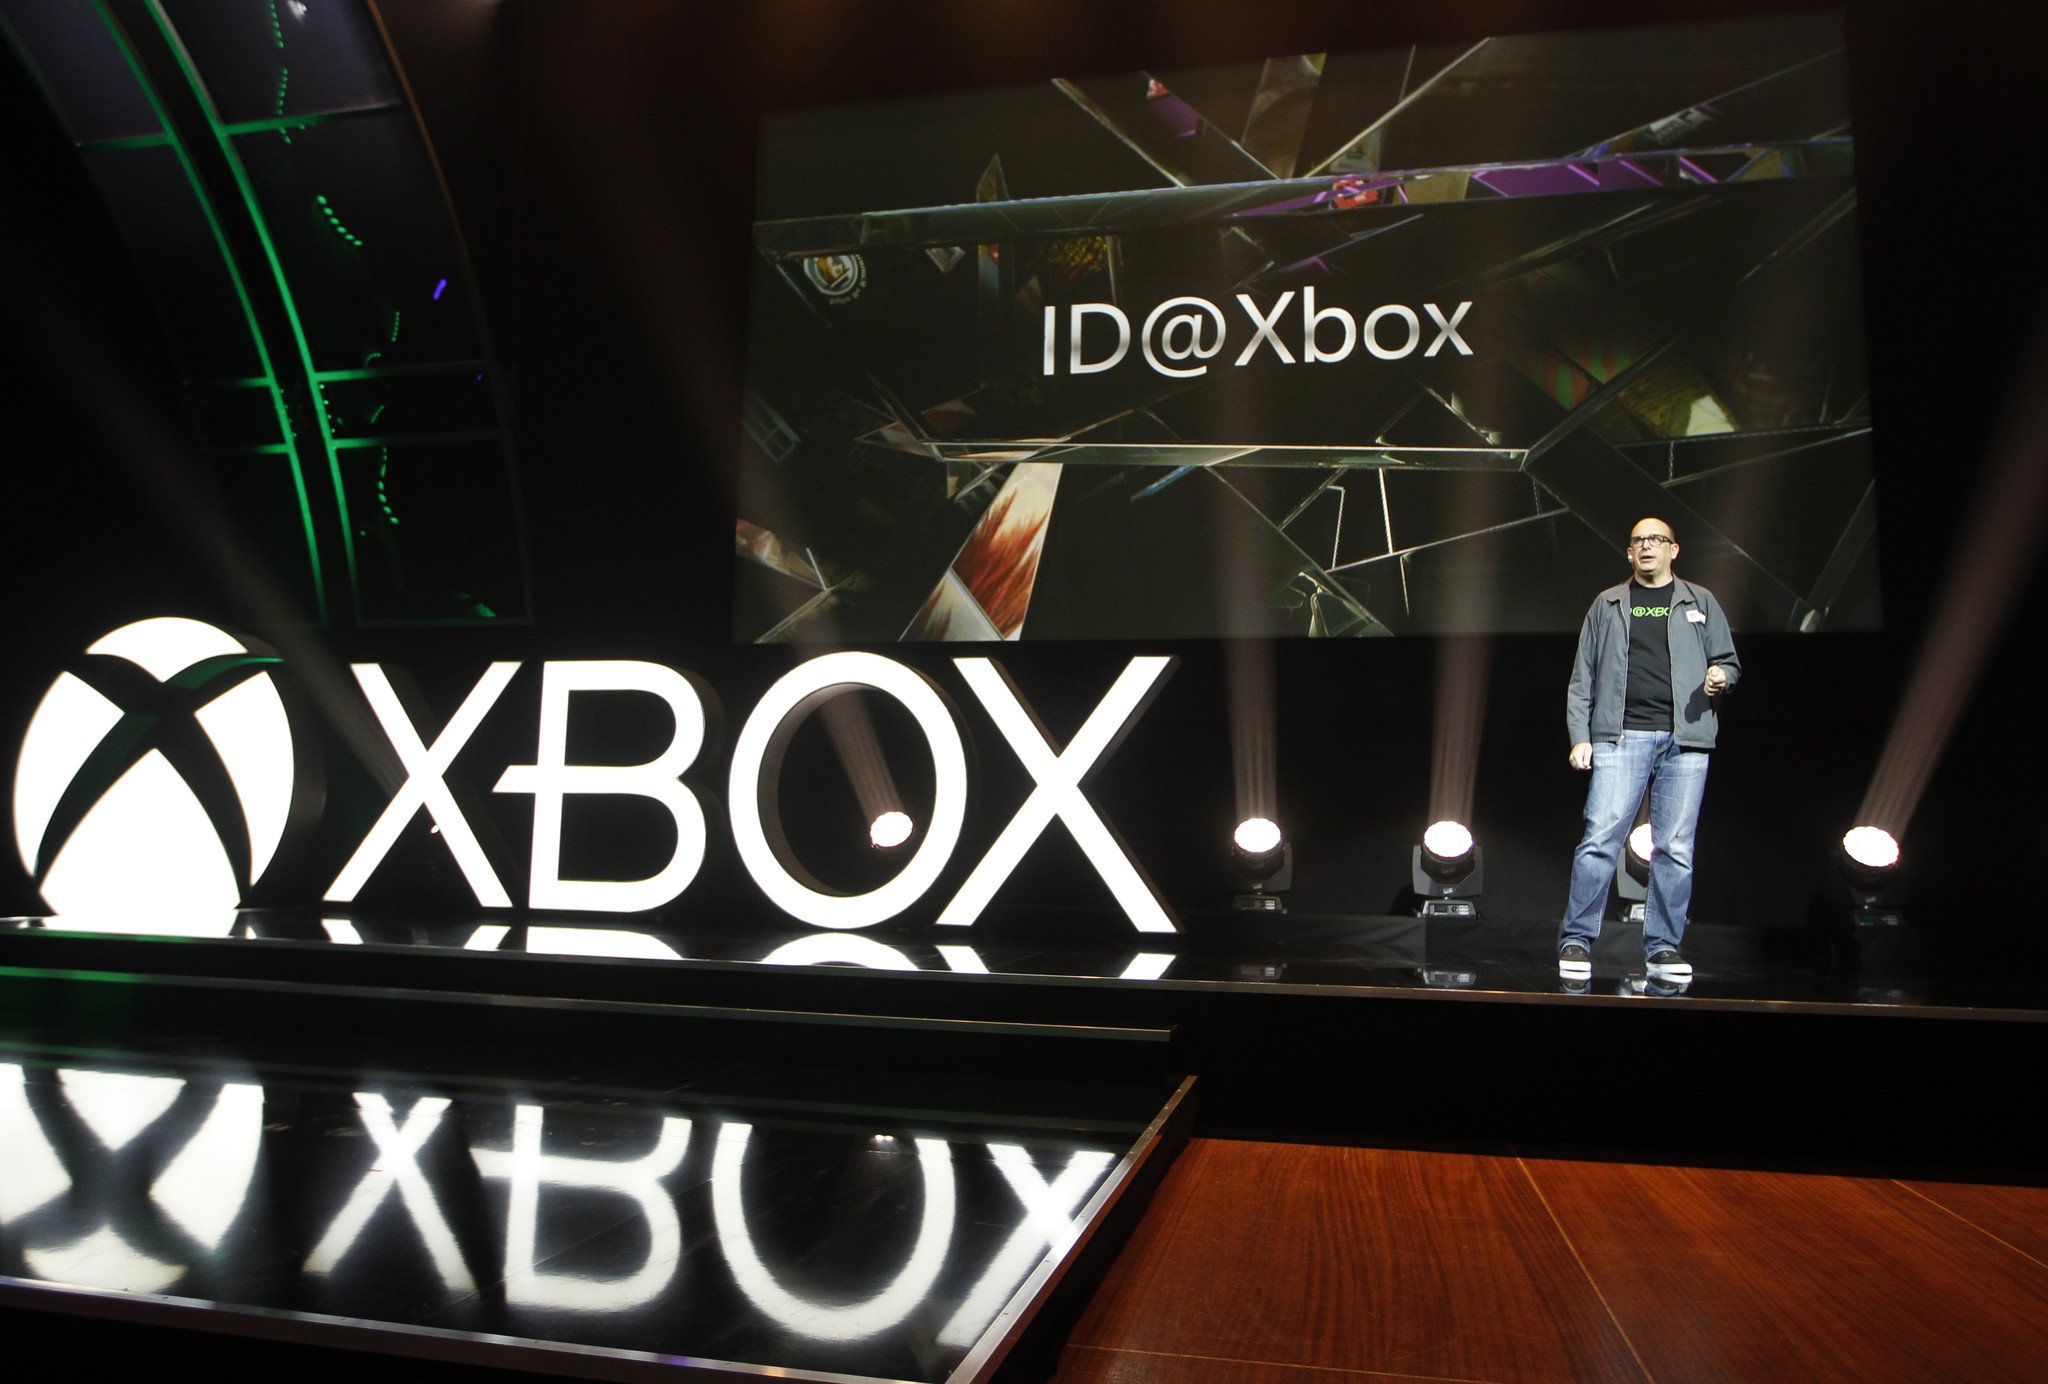 xbox-indie-id-at-xbox-banner_0.JPG